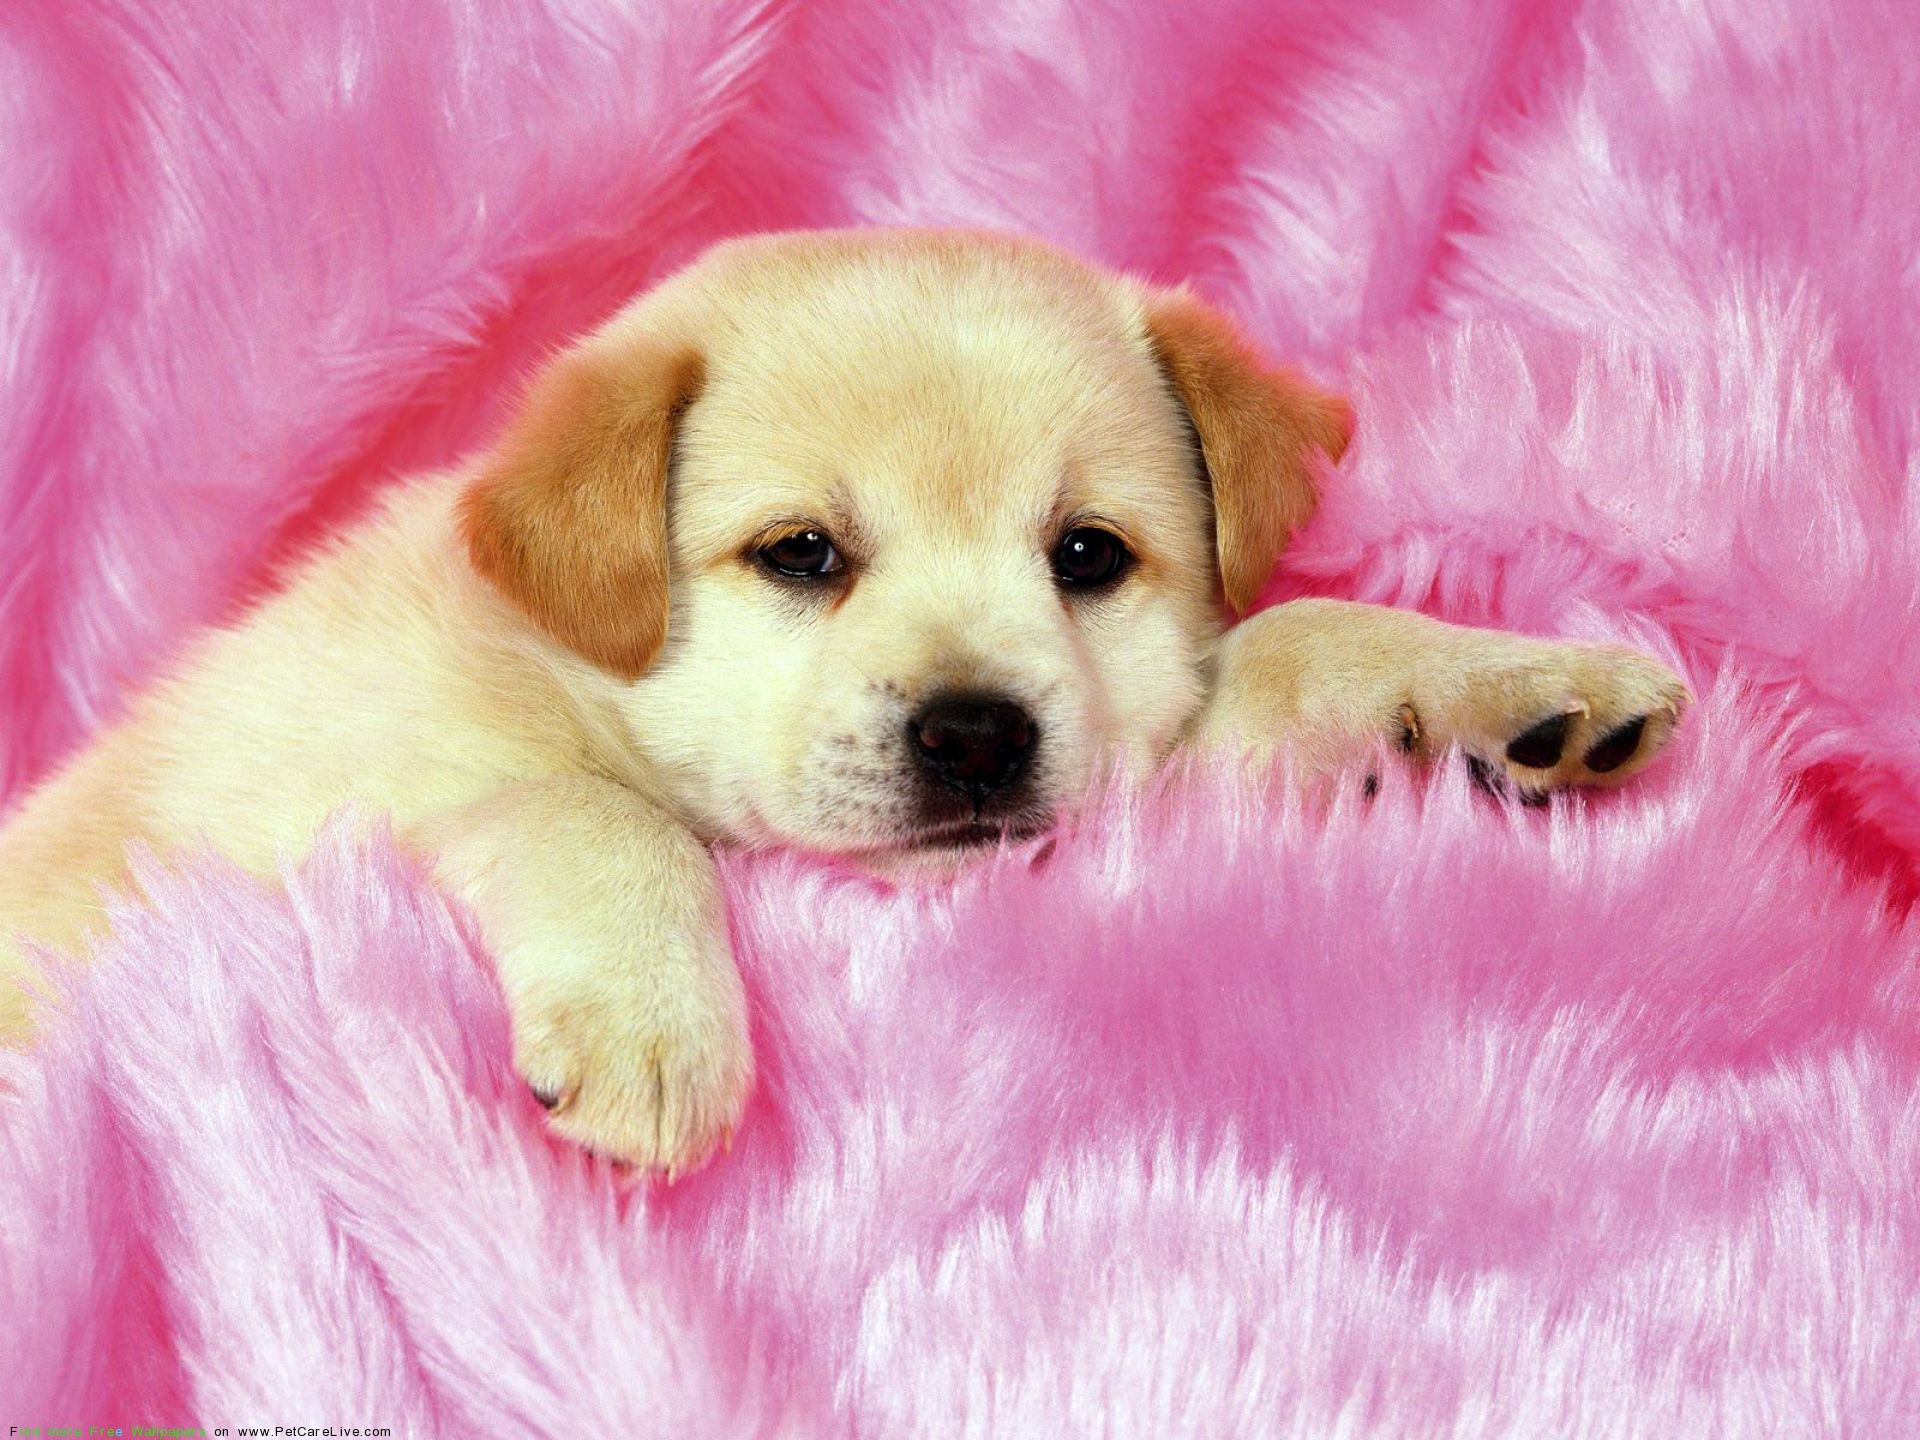 Cute Little Puppys Puppy Pictures Widescreen With Small - Puppy Wallpaper Dogs - HD Wallpaper 